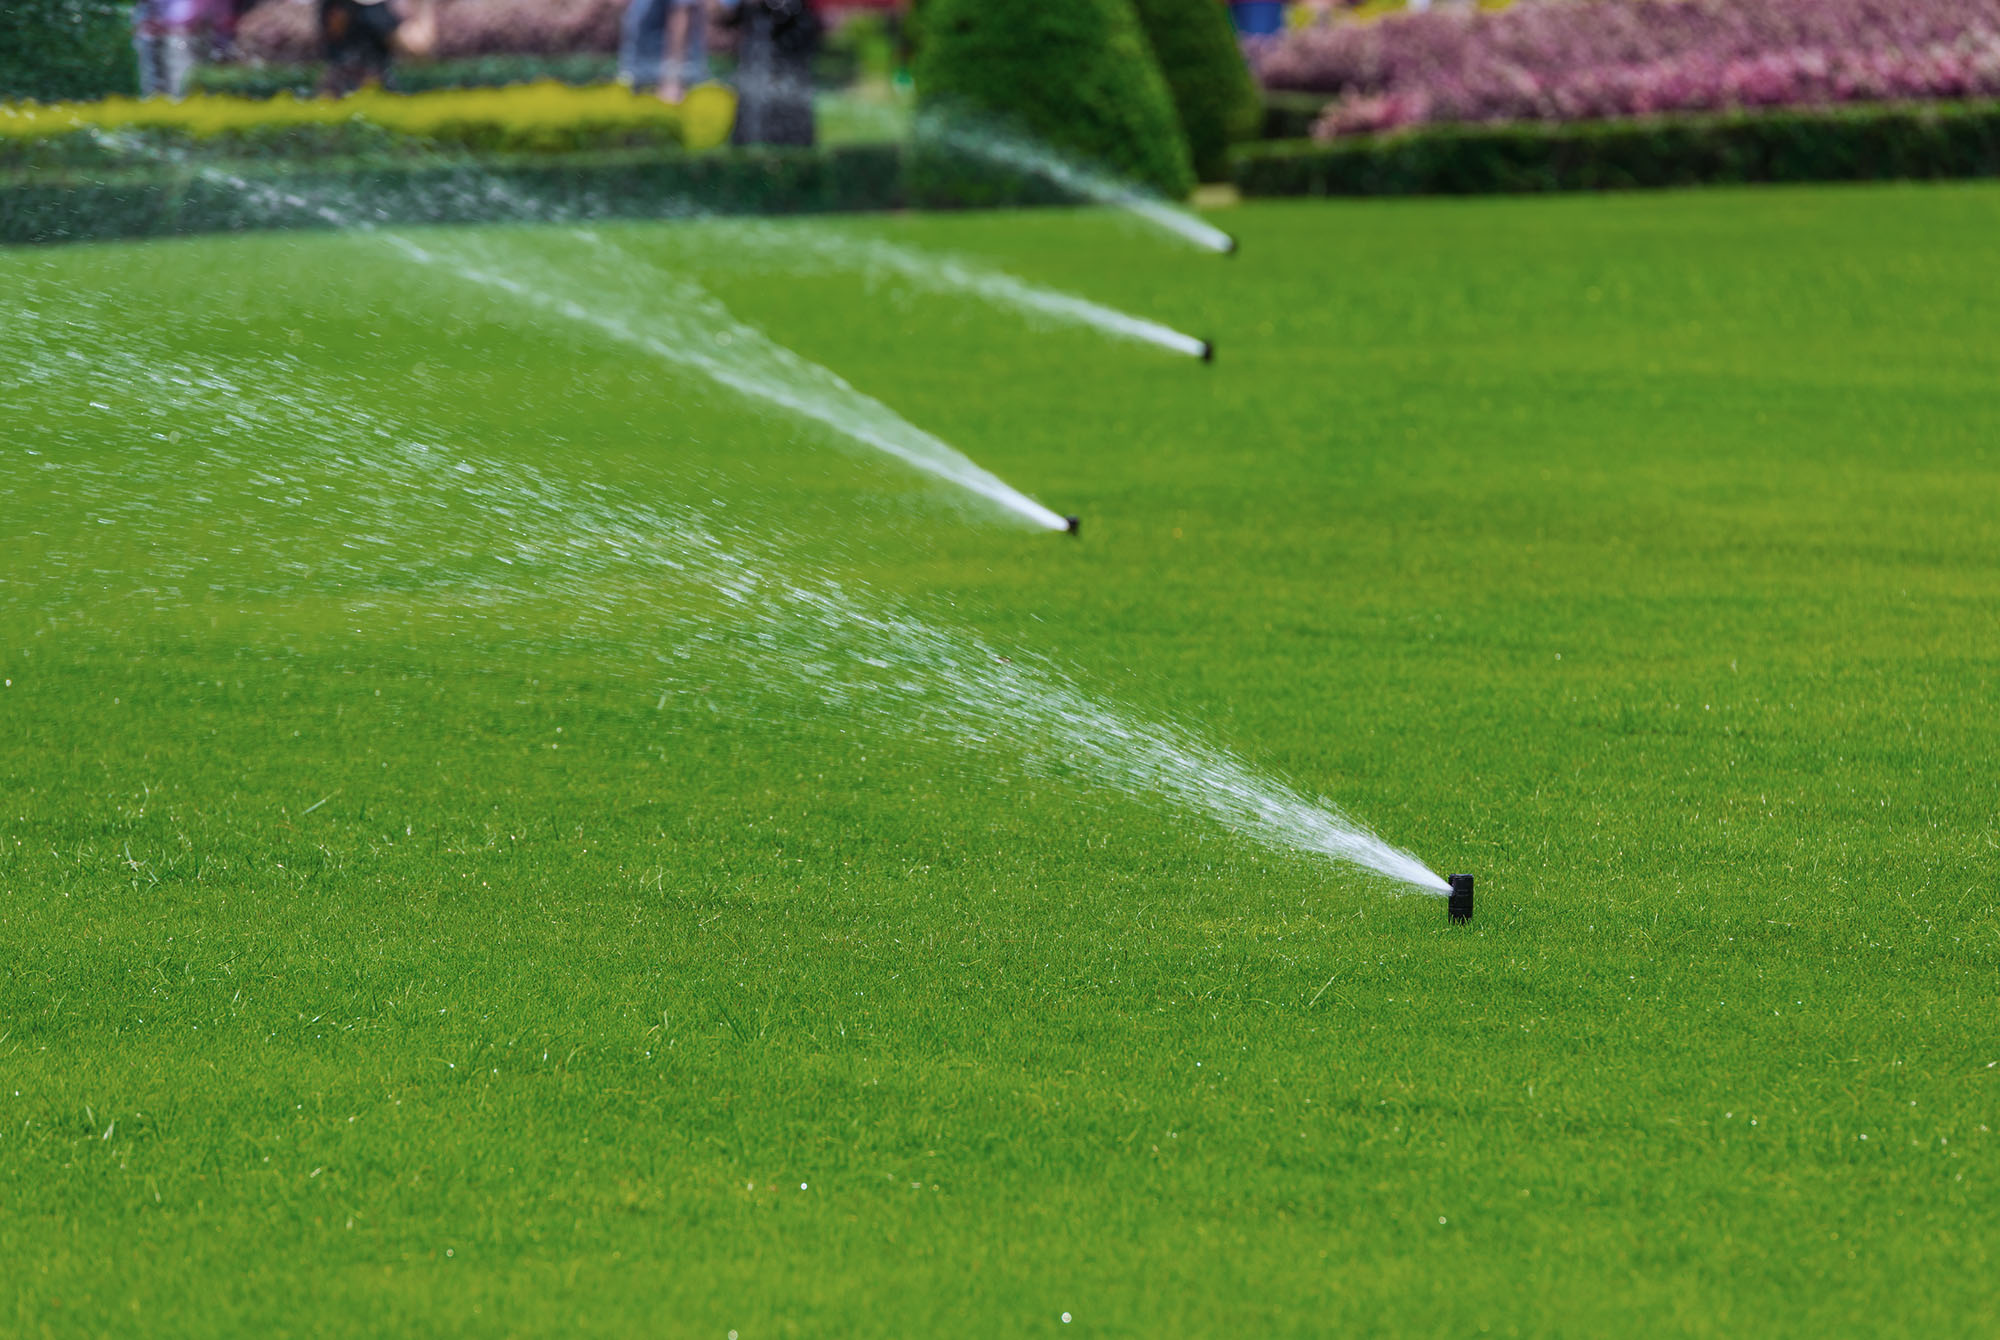 Get your lawn sprinklers ready for spring!